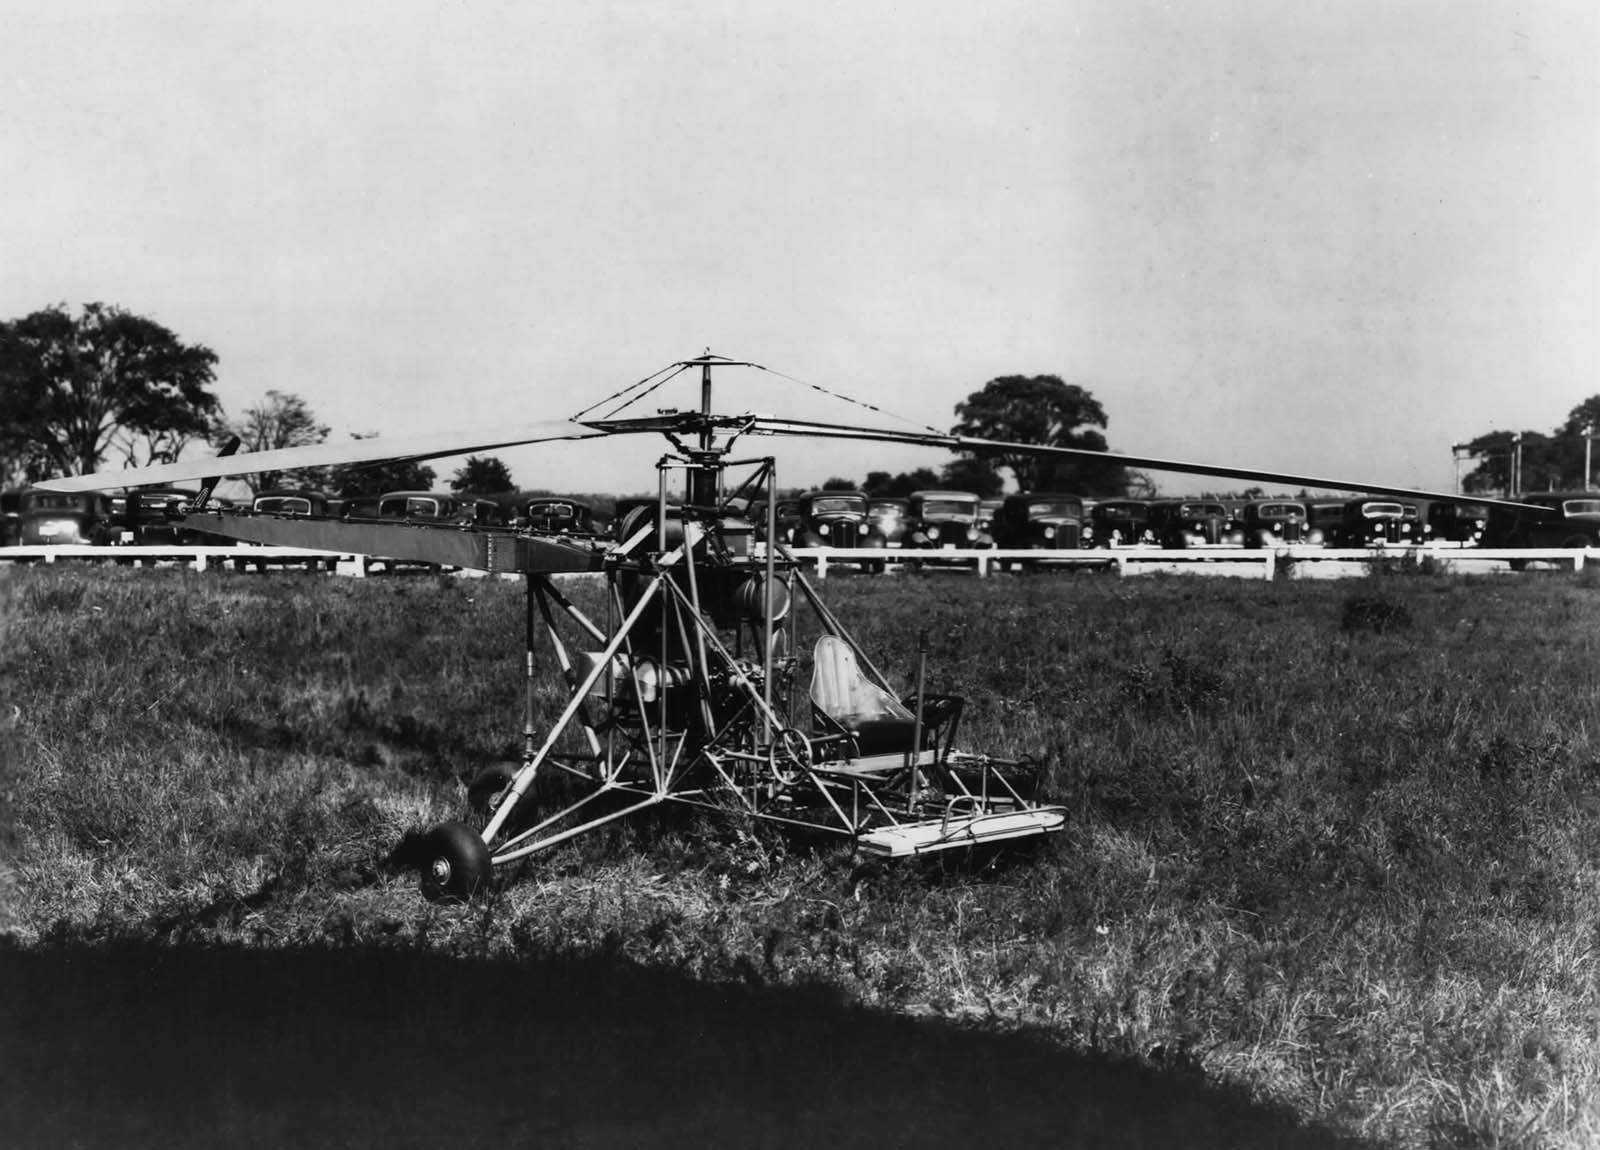 The VS-300 helicopter on the morning of its first flight, September 14, 1939.